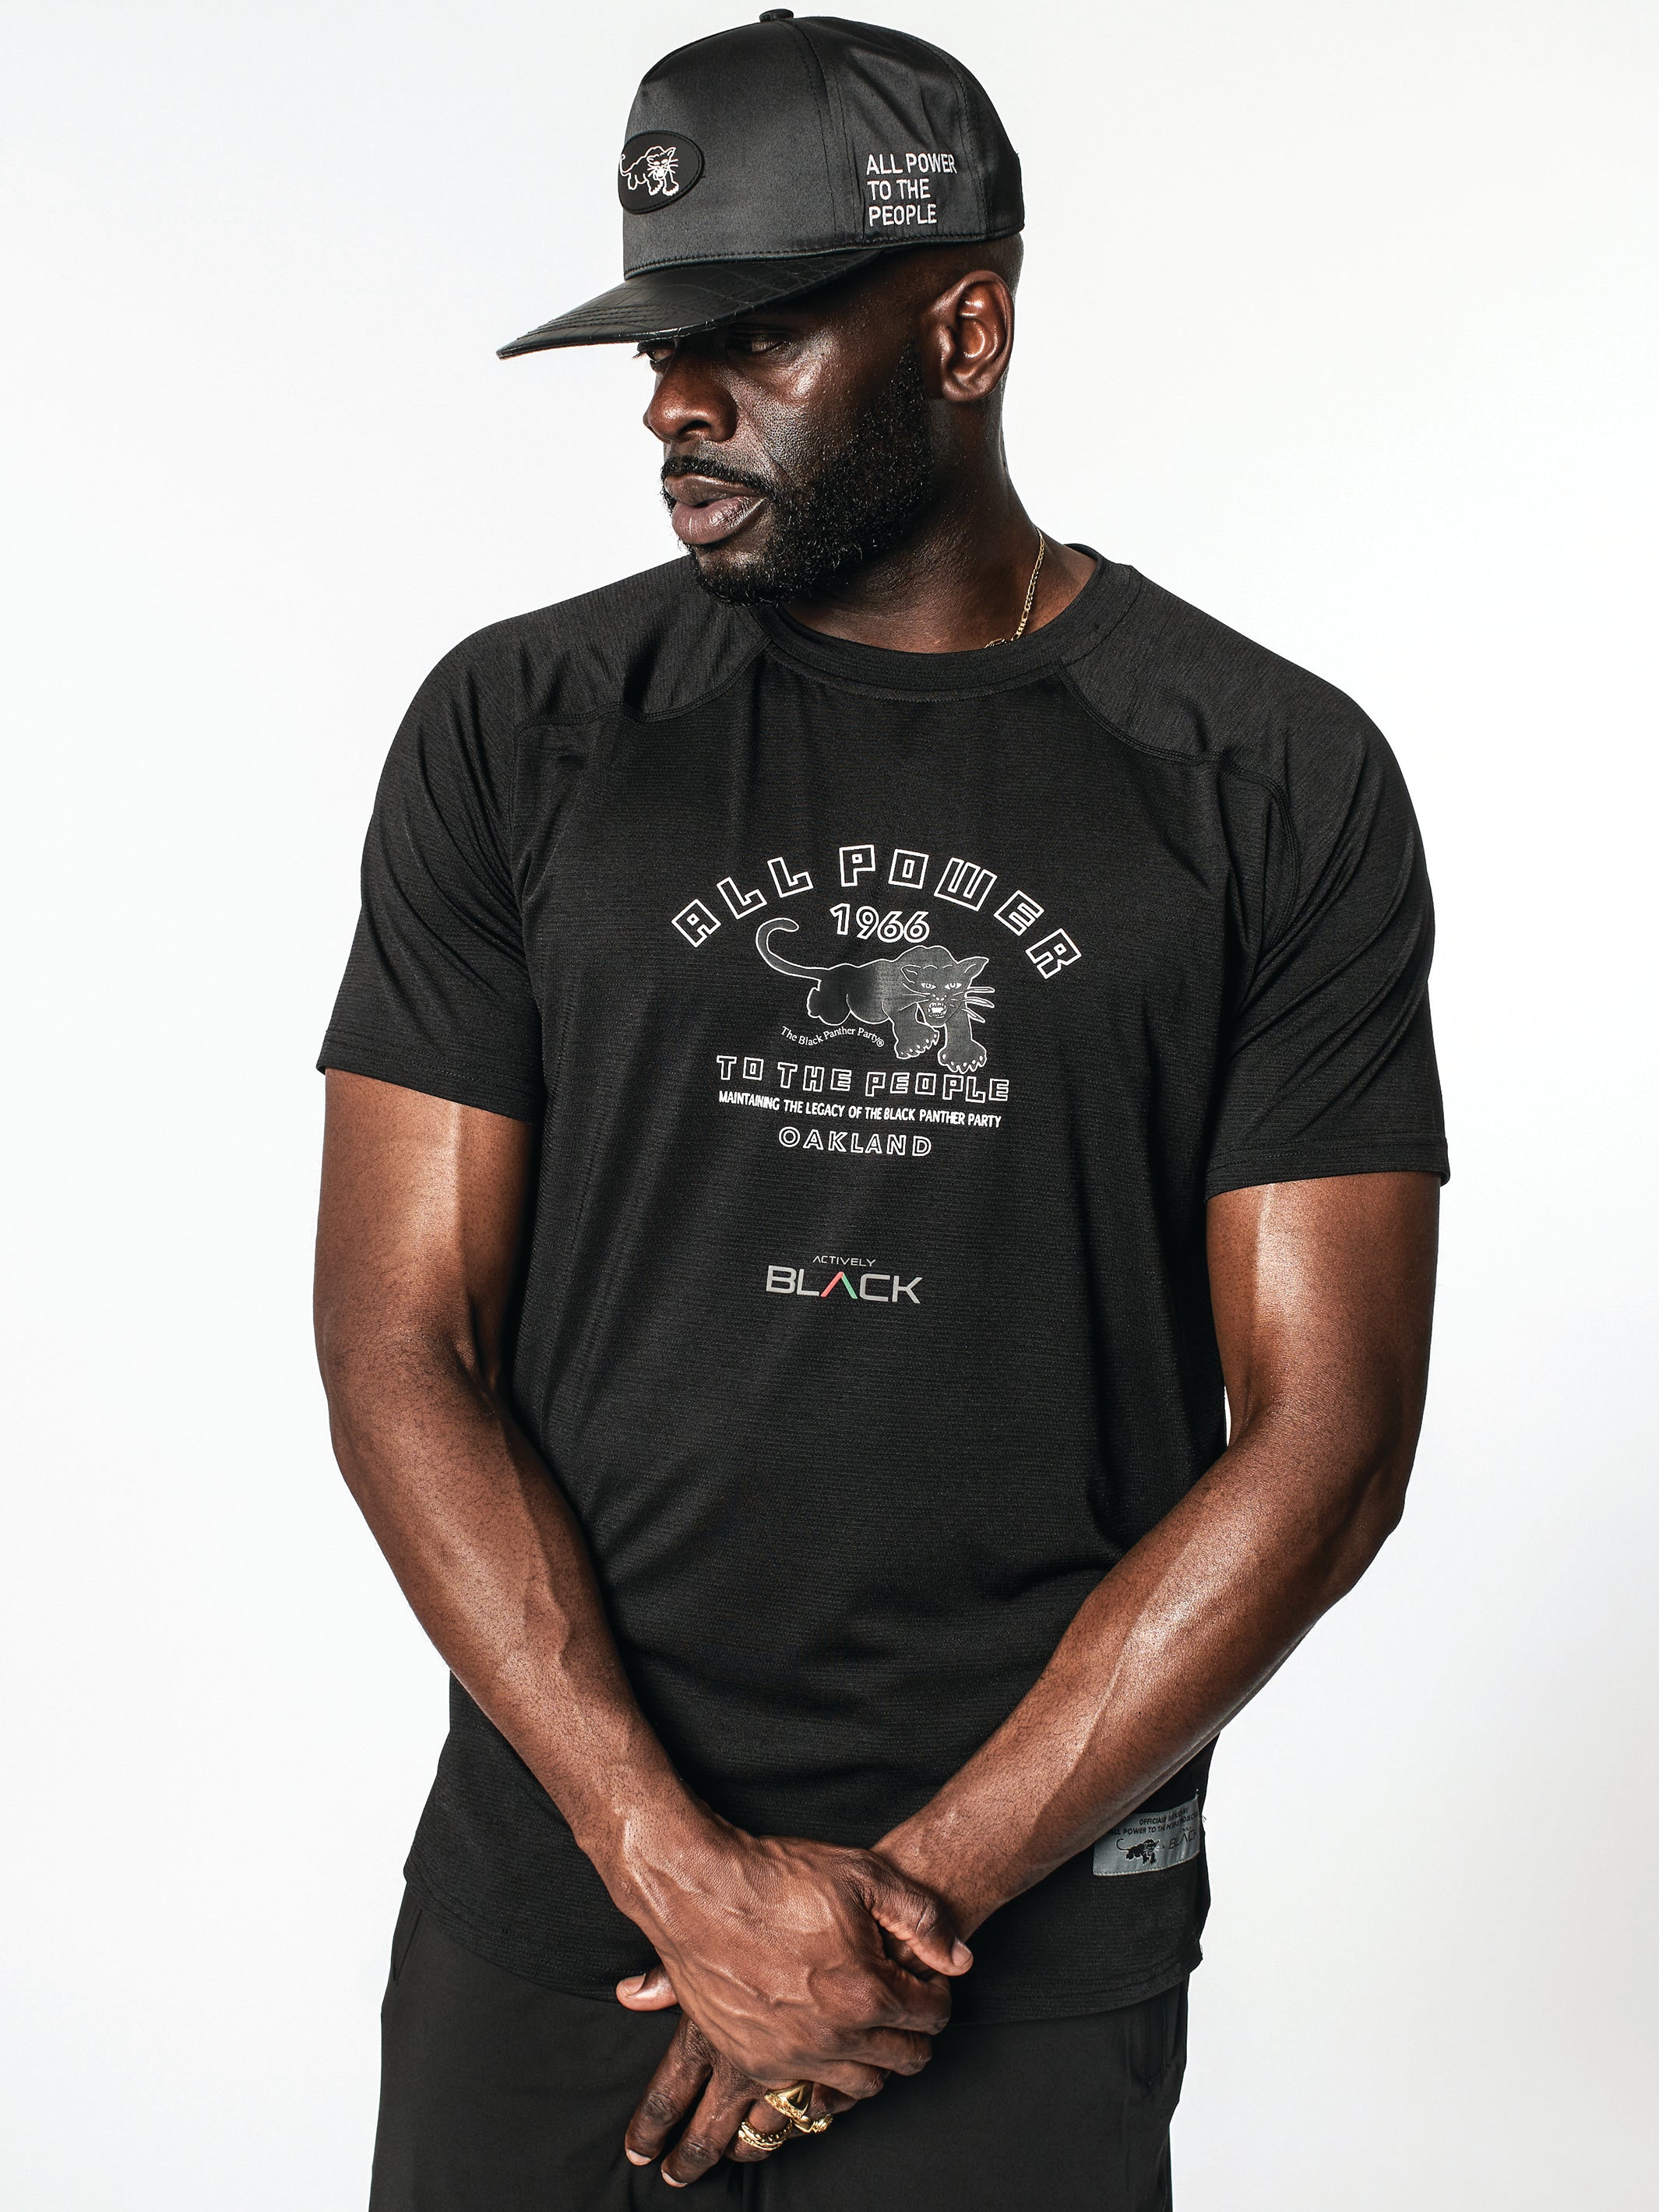 Unisex Power To The People Performance Shirt